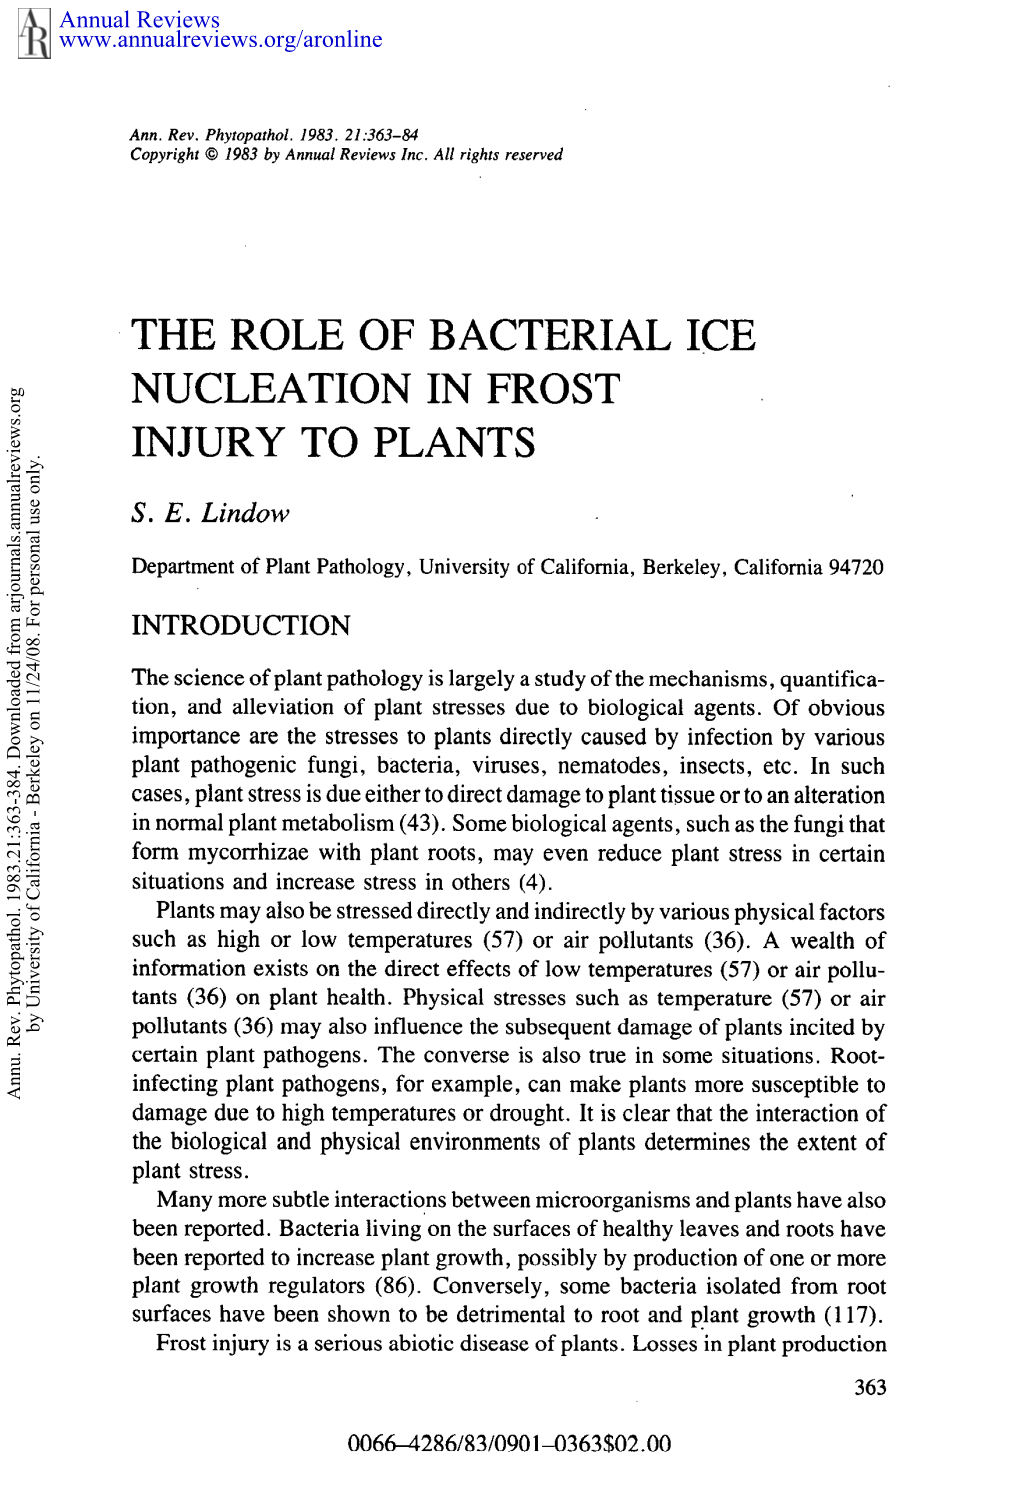 The Role of Bacterial Ice Nucleation in Frost Injury to Plants